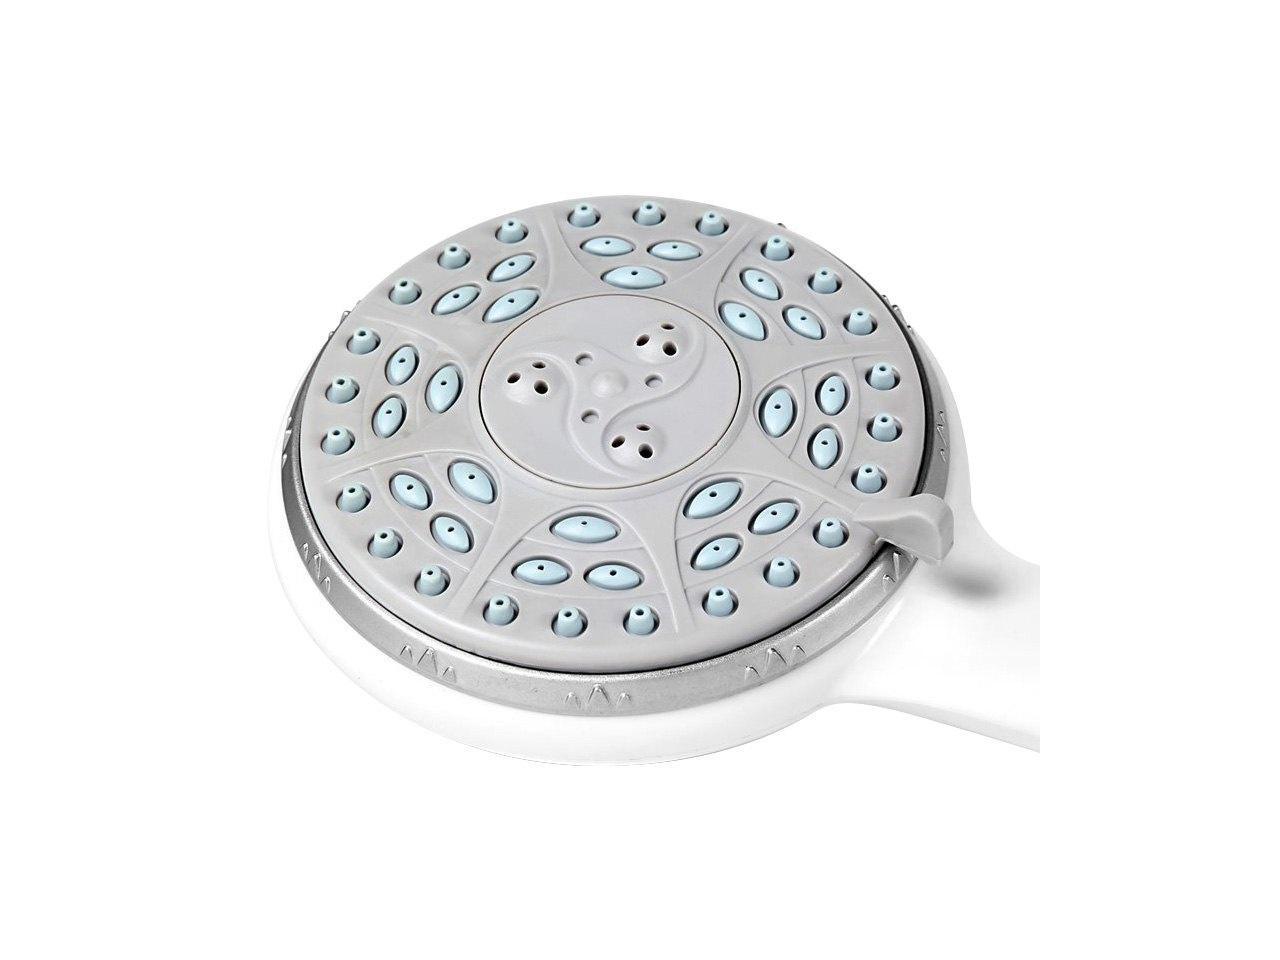 CAMCO 5 SETTINGS SHOWER HEAD 43711 